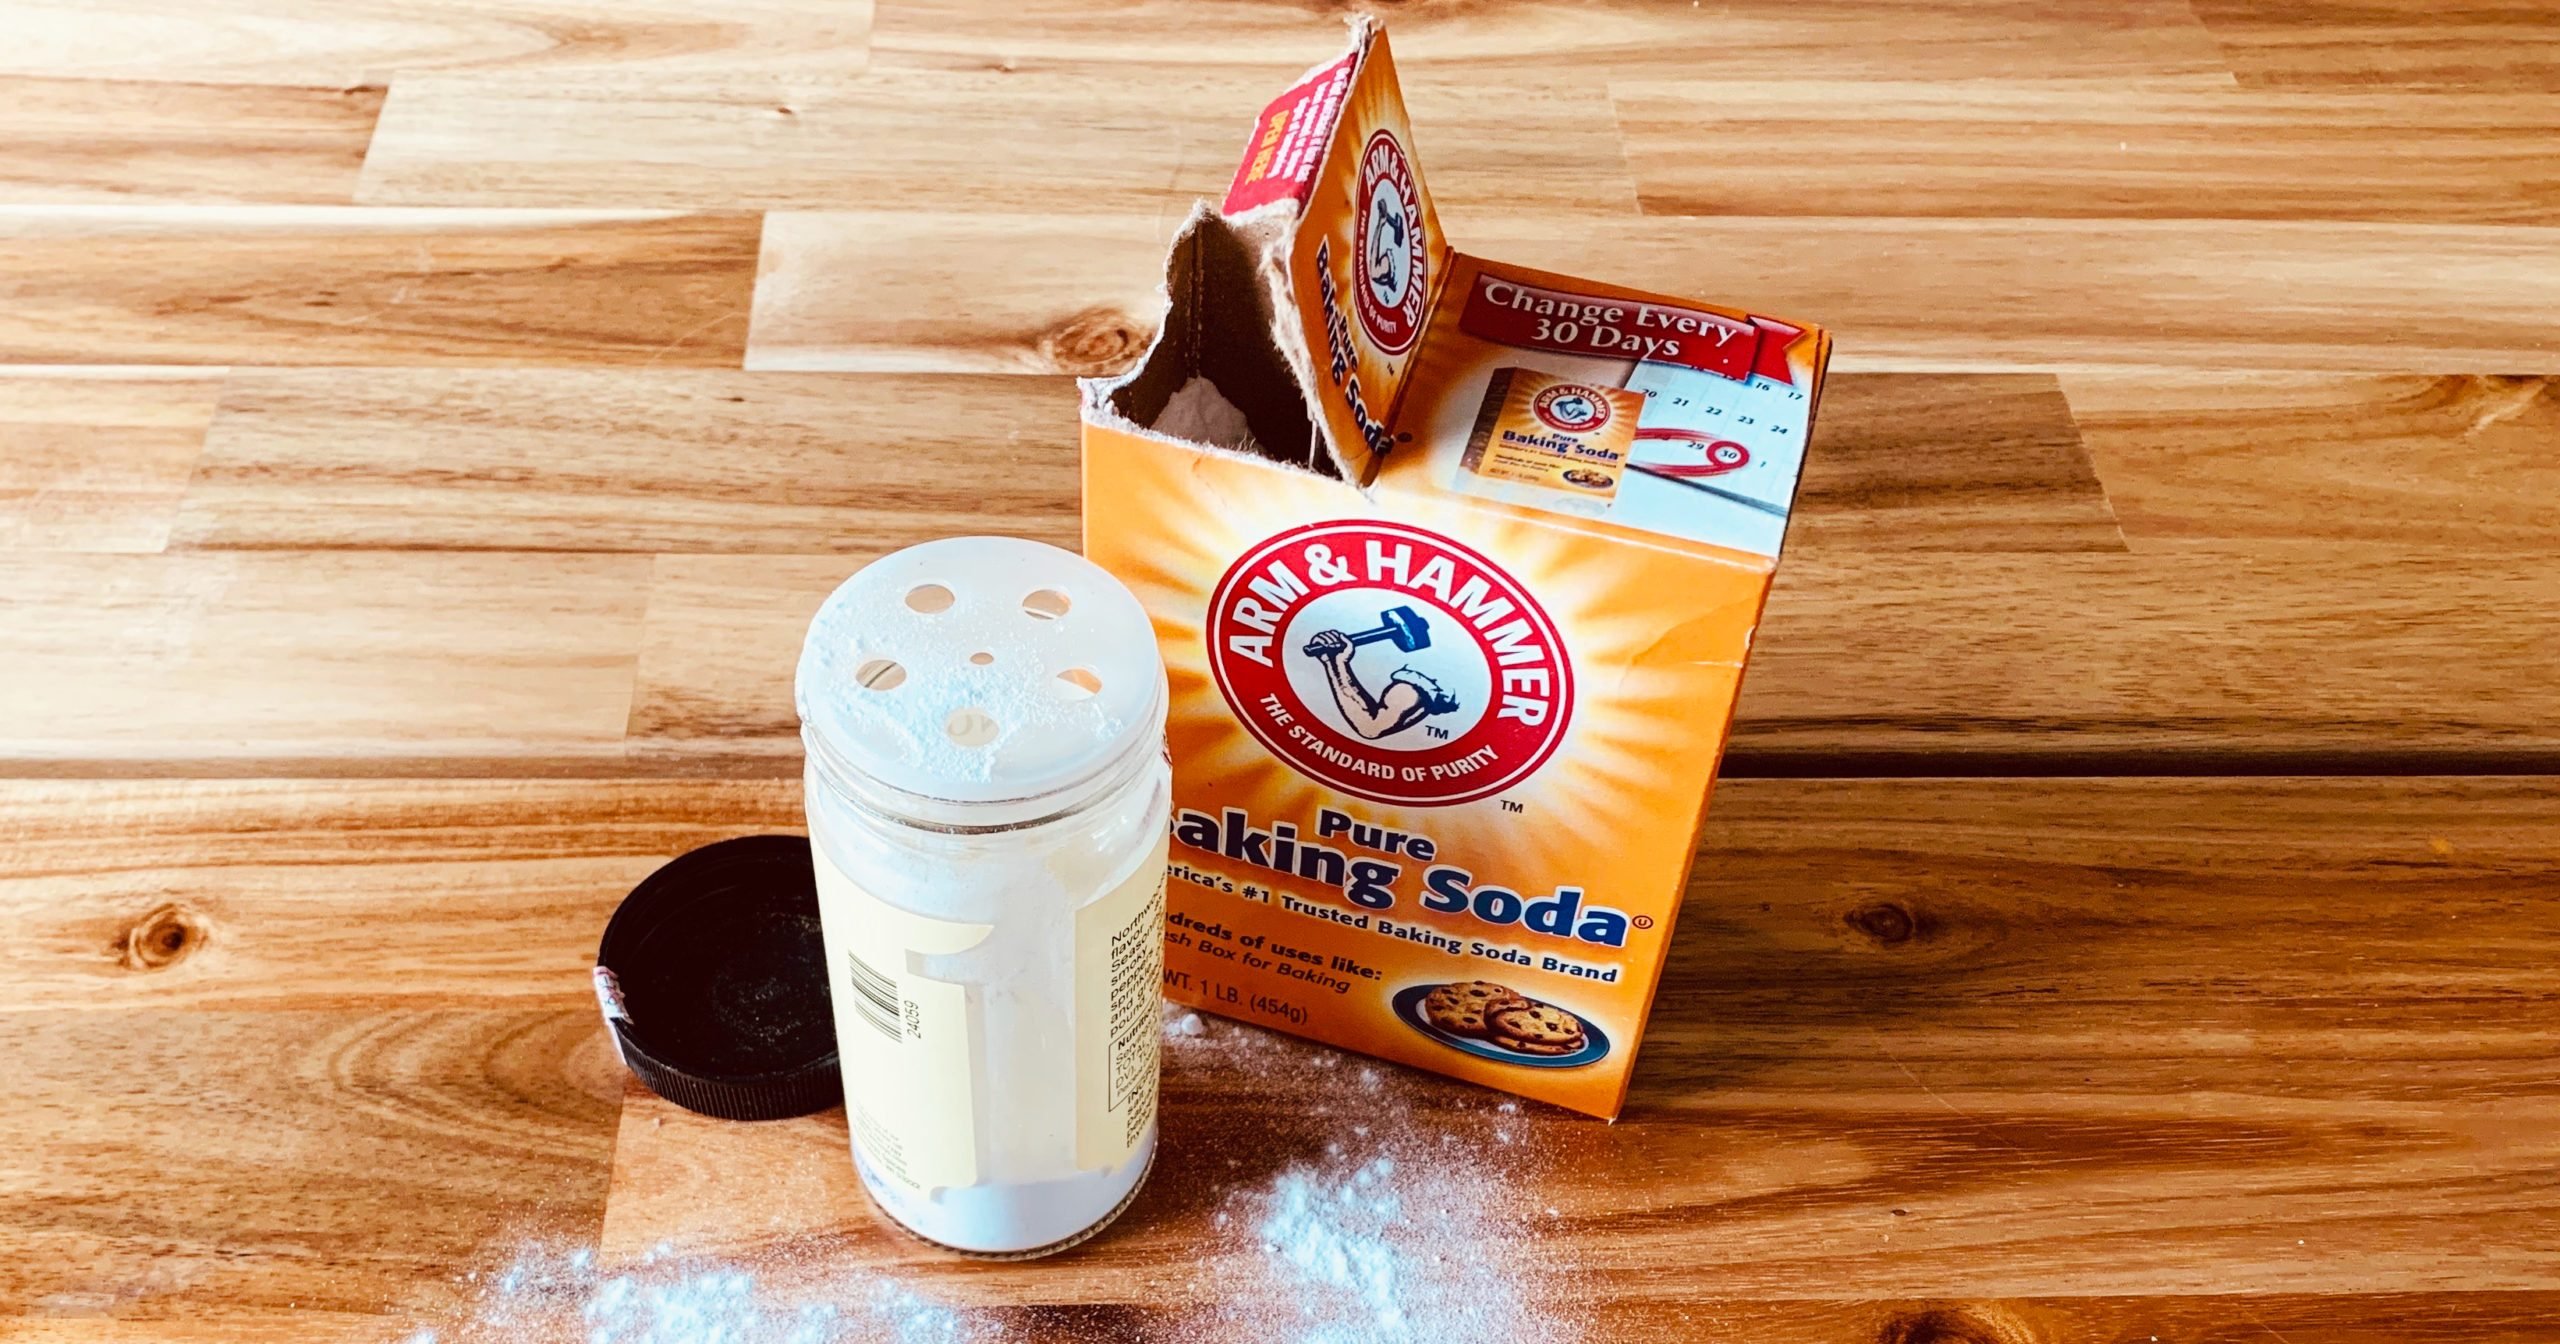 We All Love Baking Soda, but Where Does It Come From?